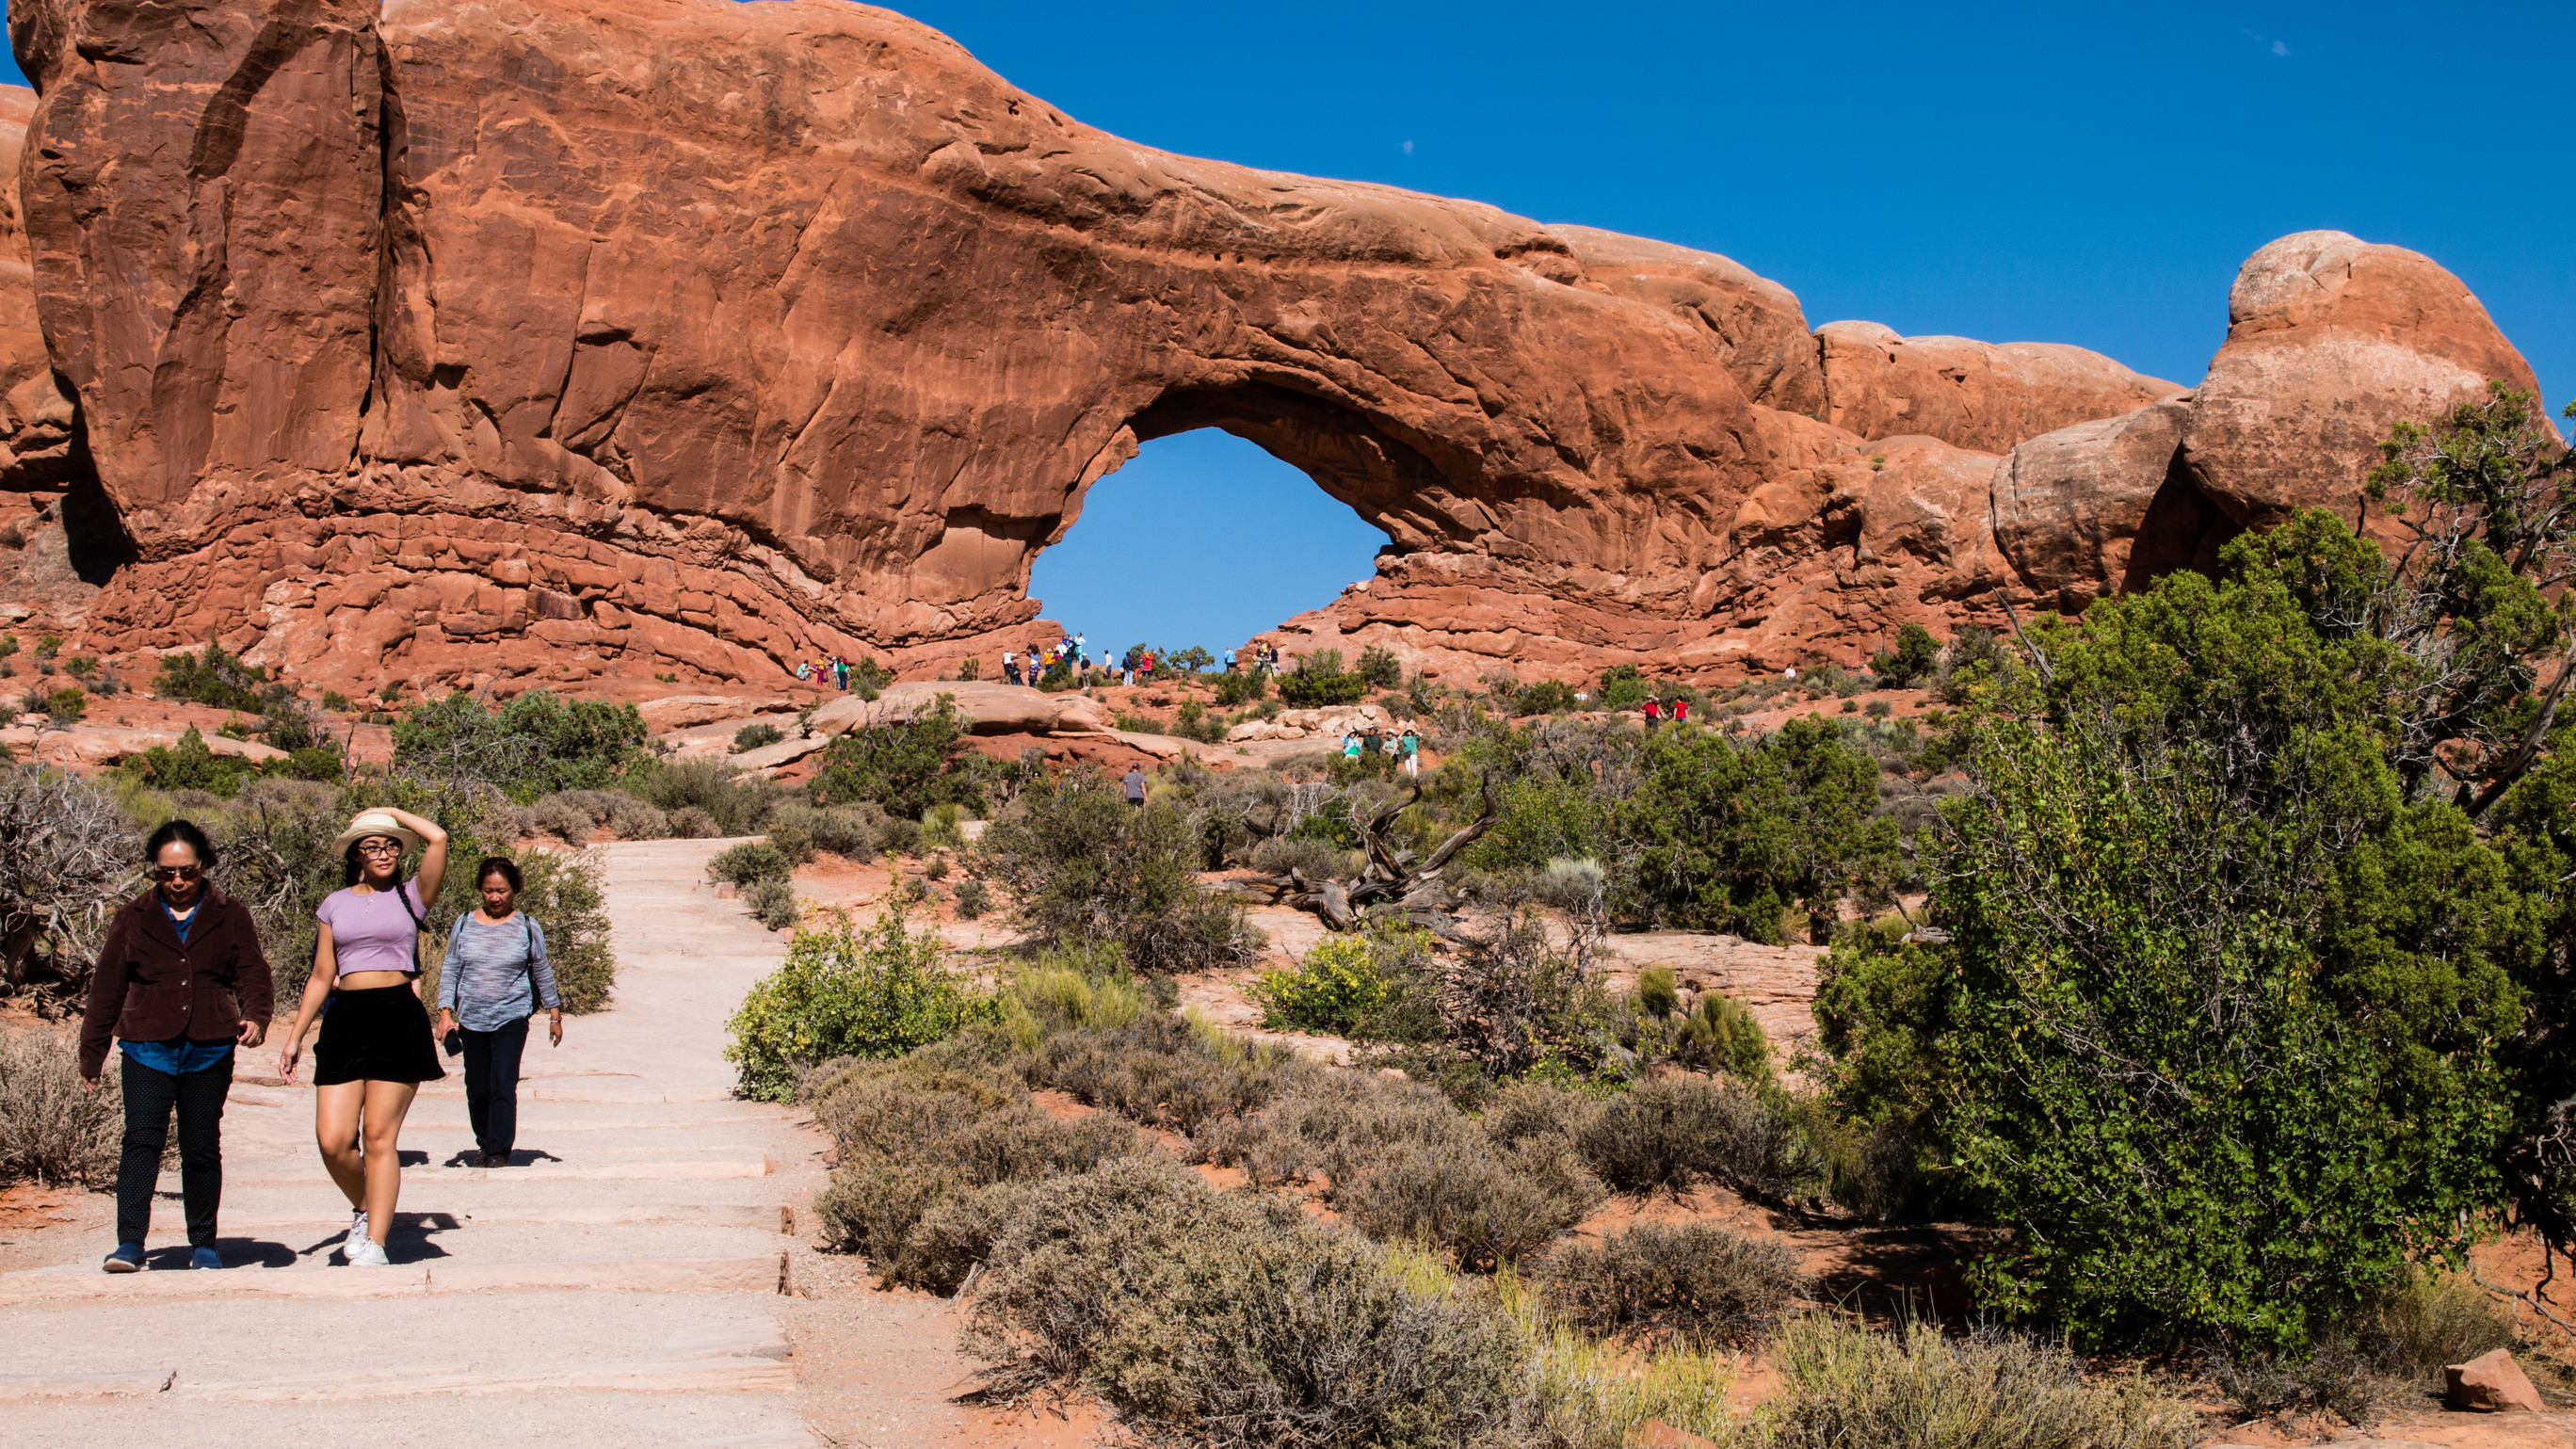 Visitors walk along a paved pathway at Arches National Park. Photo by M. Reed, NPS.